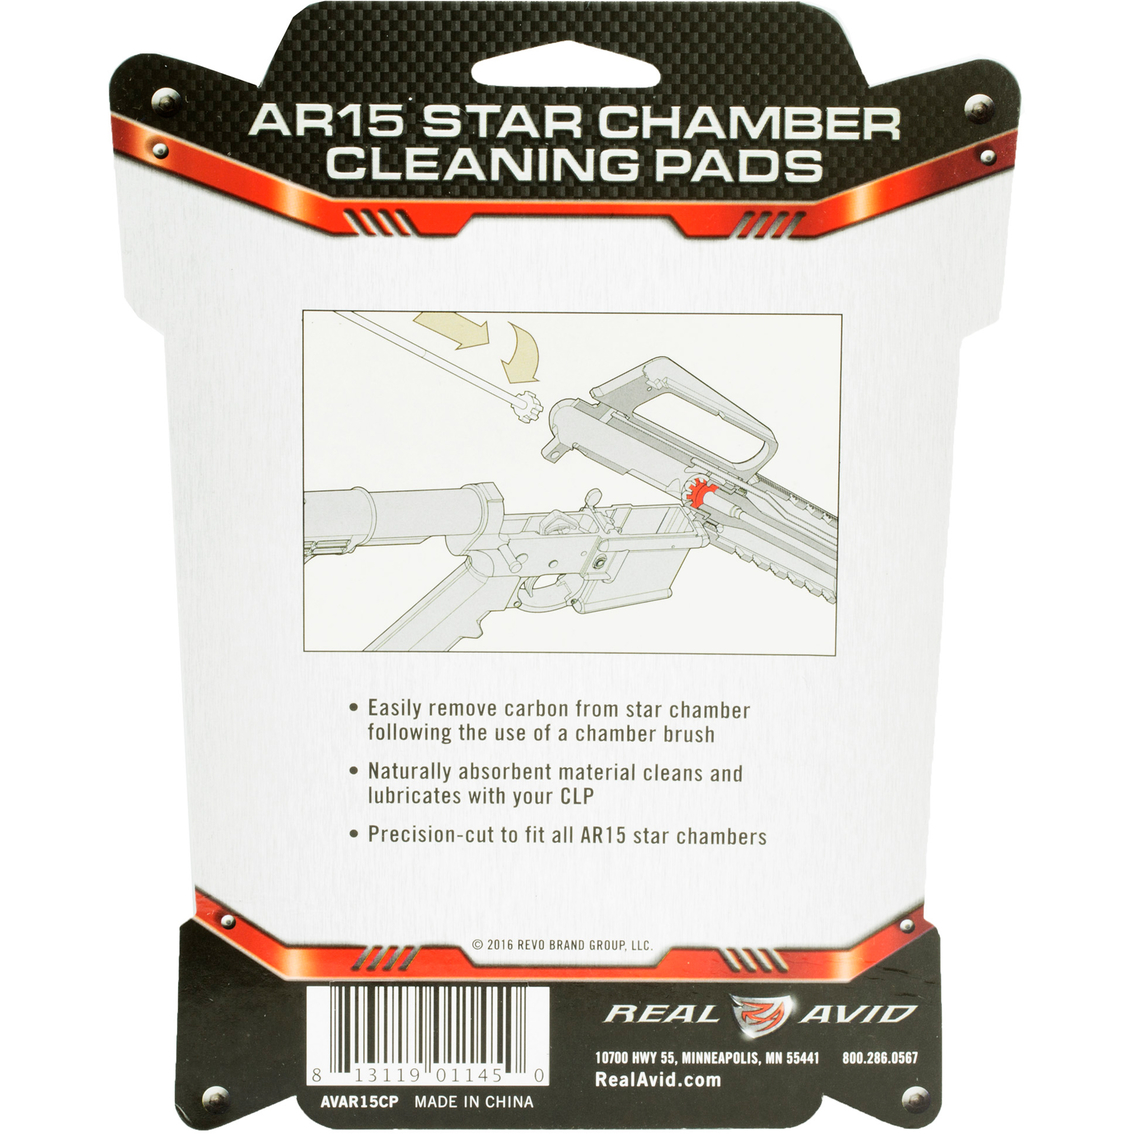 Real Avid AR-15 Star Chamber Cleaning Pads 20 pk. - Image 2 of 3